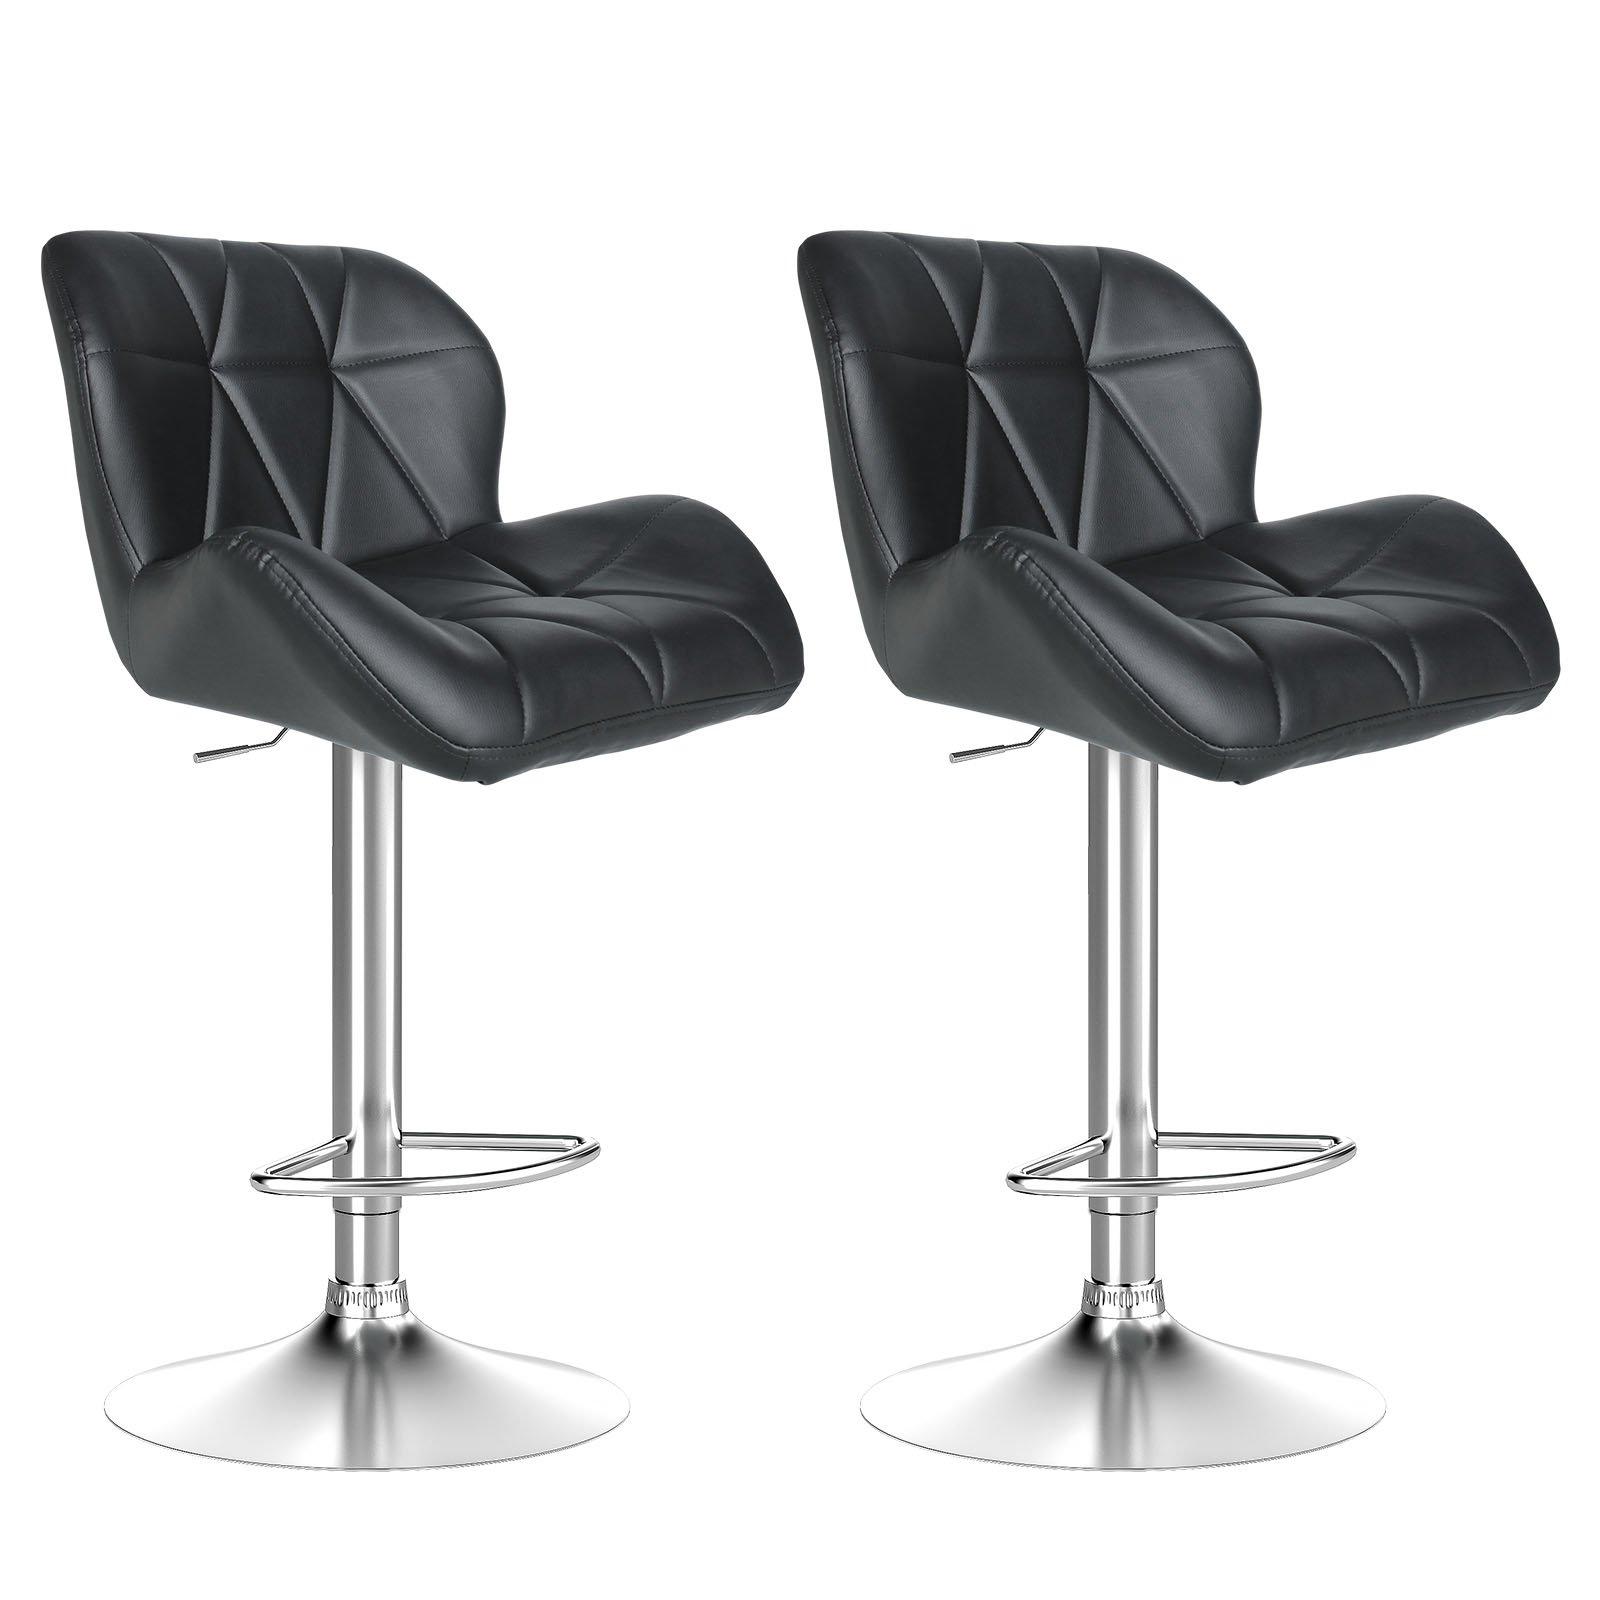 Set of 2 Bar Stools,Swivel PU Leather Bar Chairs for Home&Kitchen(Black)